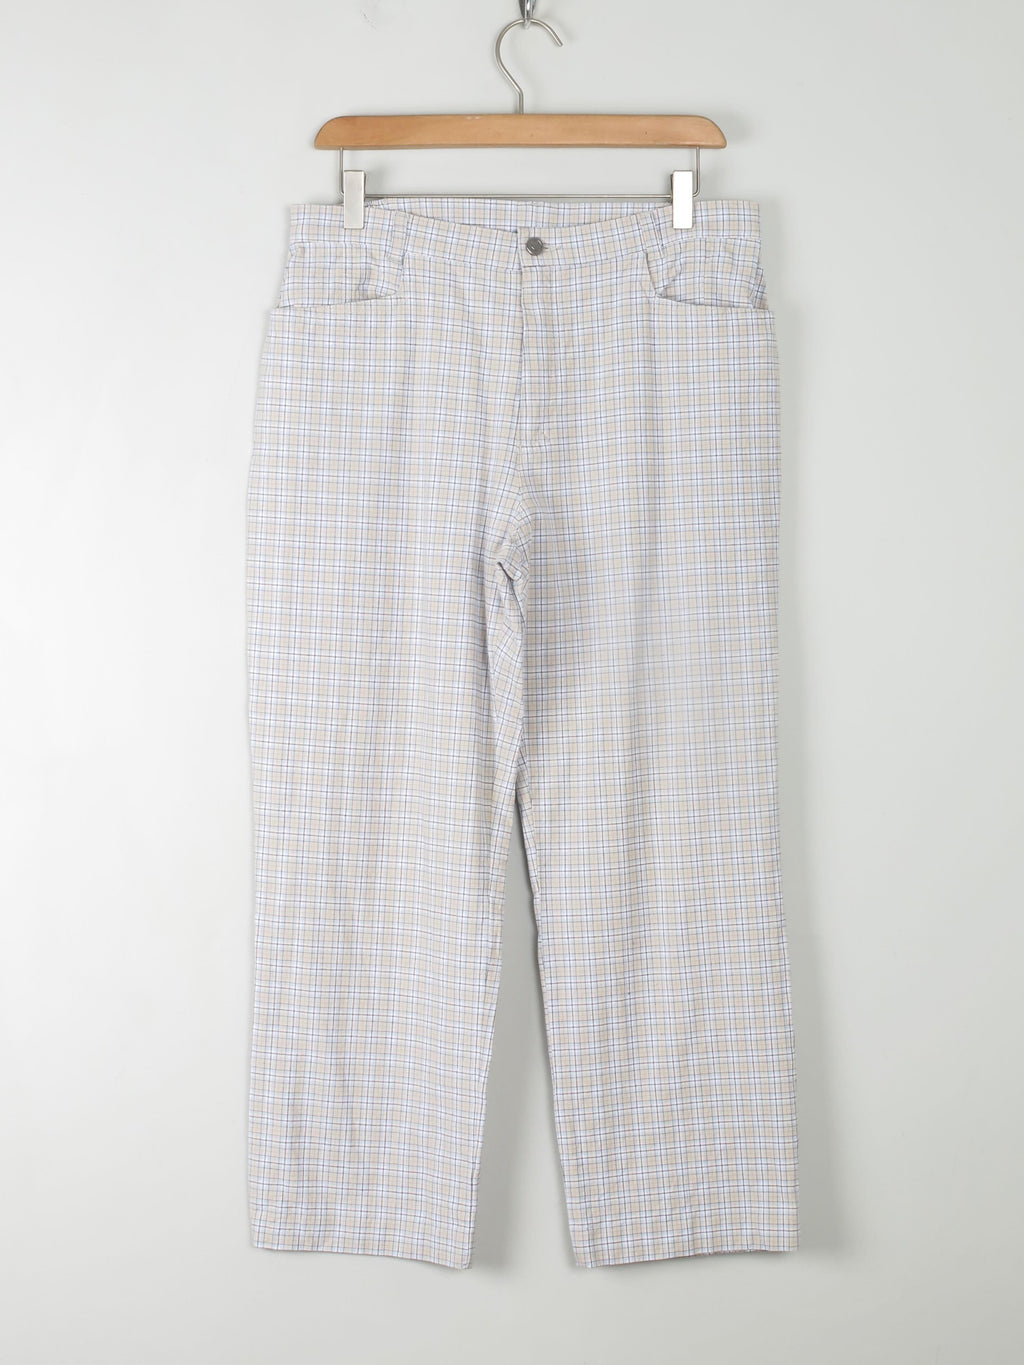 Women's Check Blue & Cream Slightly Cropped Trousers L - The Harlequin